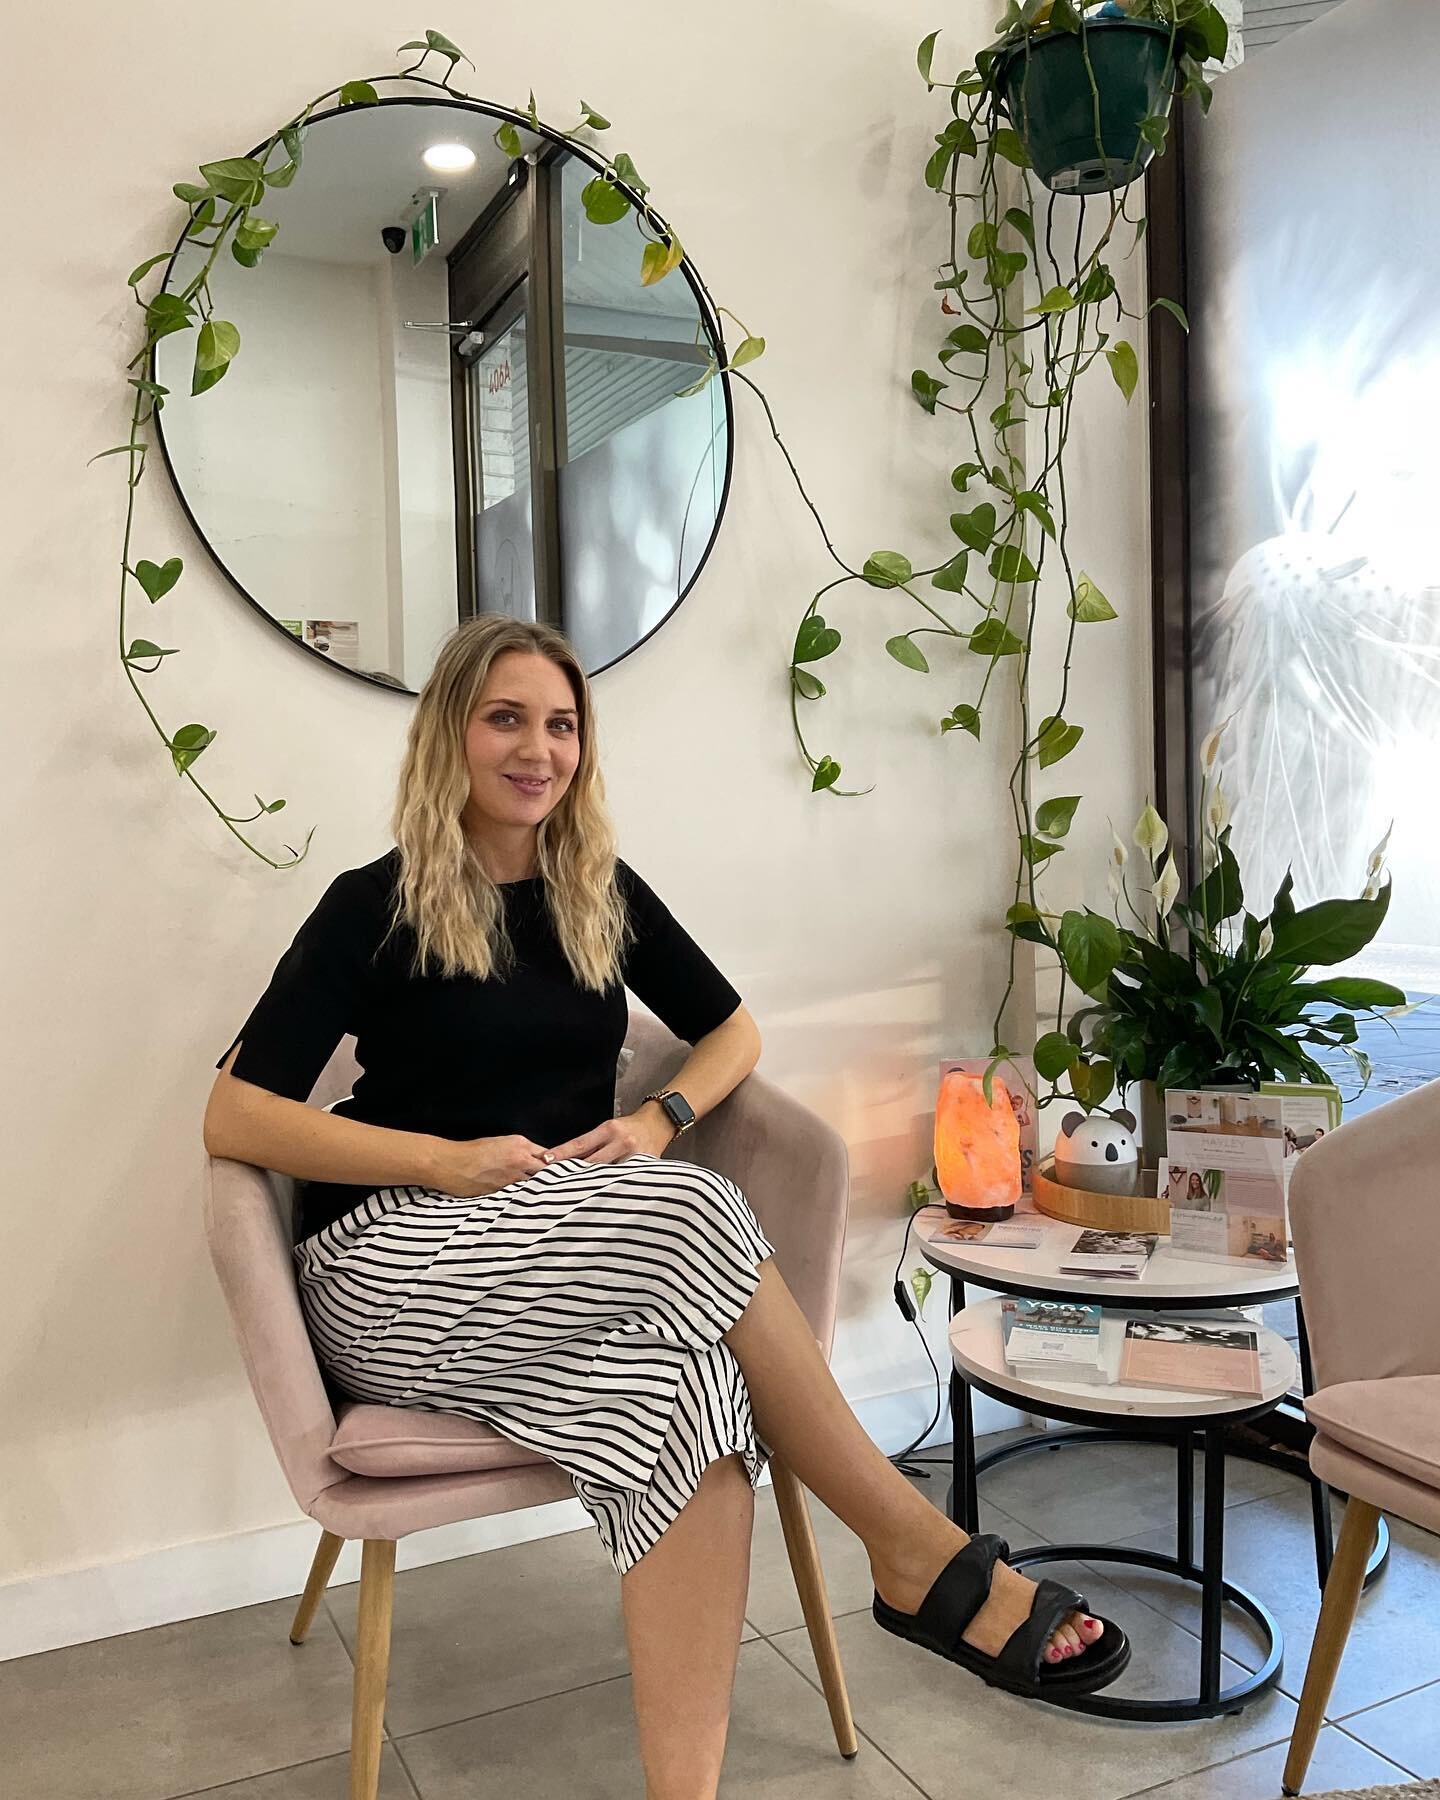 Dr Jessie Askew has been a chiropractor across bayside since she completed her Masters in Clinical Chiropractic in 2010, where she graduated with distinction. 

She has since completed many postgraduate hours studying paediatric development and pregn